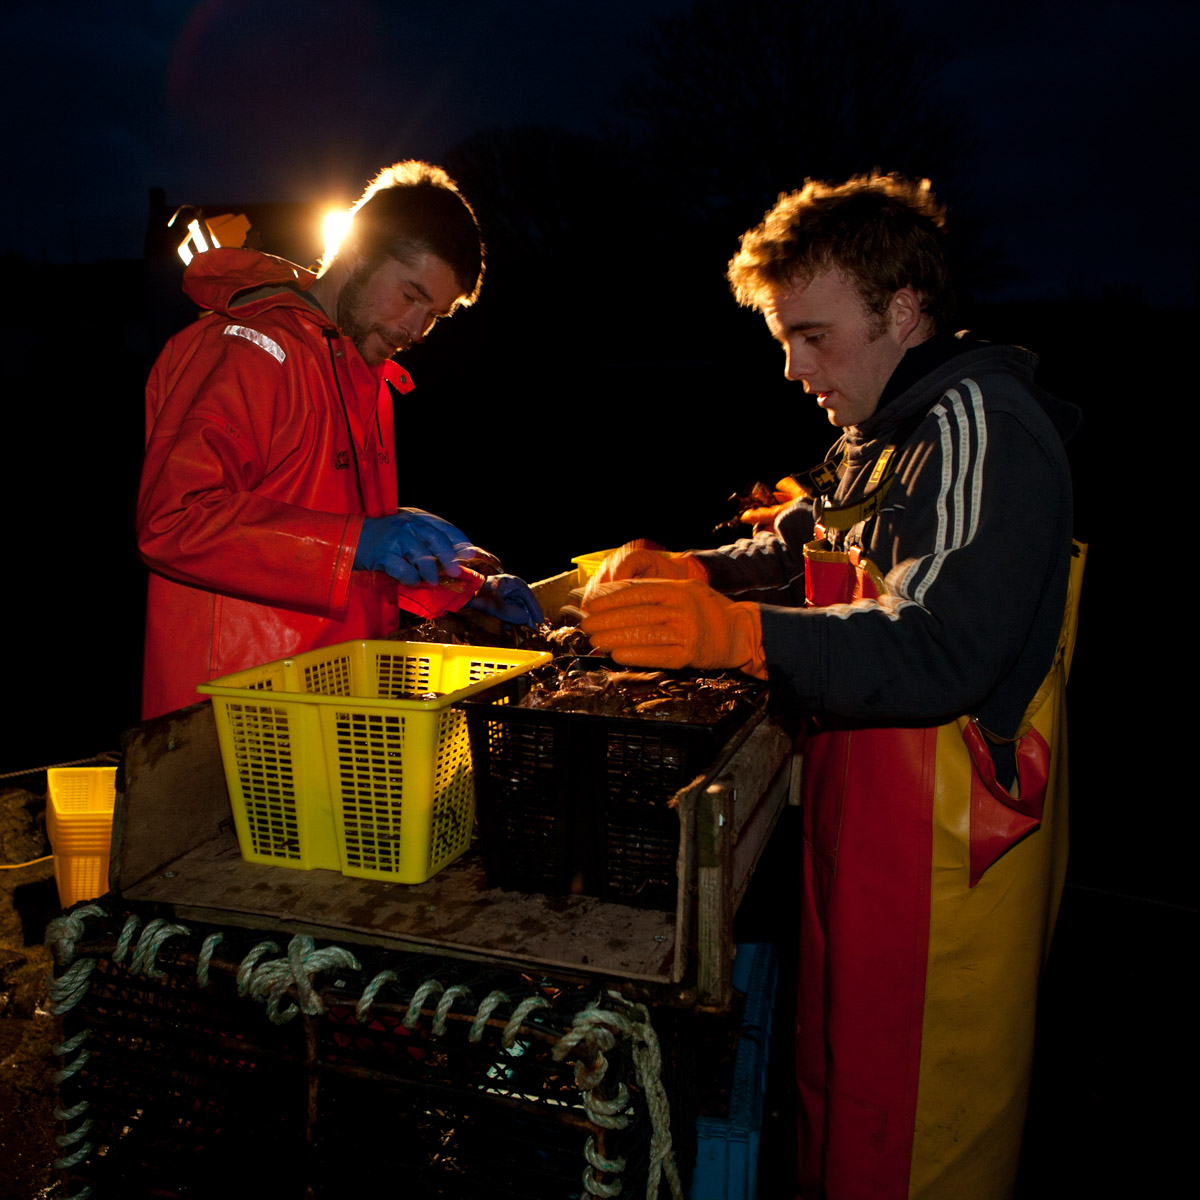 Colin Morrison & Ronan Martin sorting brown crabs in pre-dawn light before the refrigerated lorry comes to collect them, Croig Pier, Isle of Mull, Scotland (2005) #WeAreHighlandsAndIslands  #TheHillsAreAlwaysHere